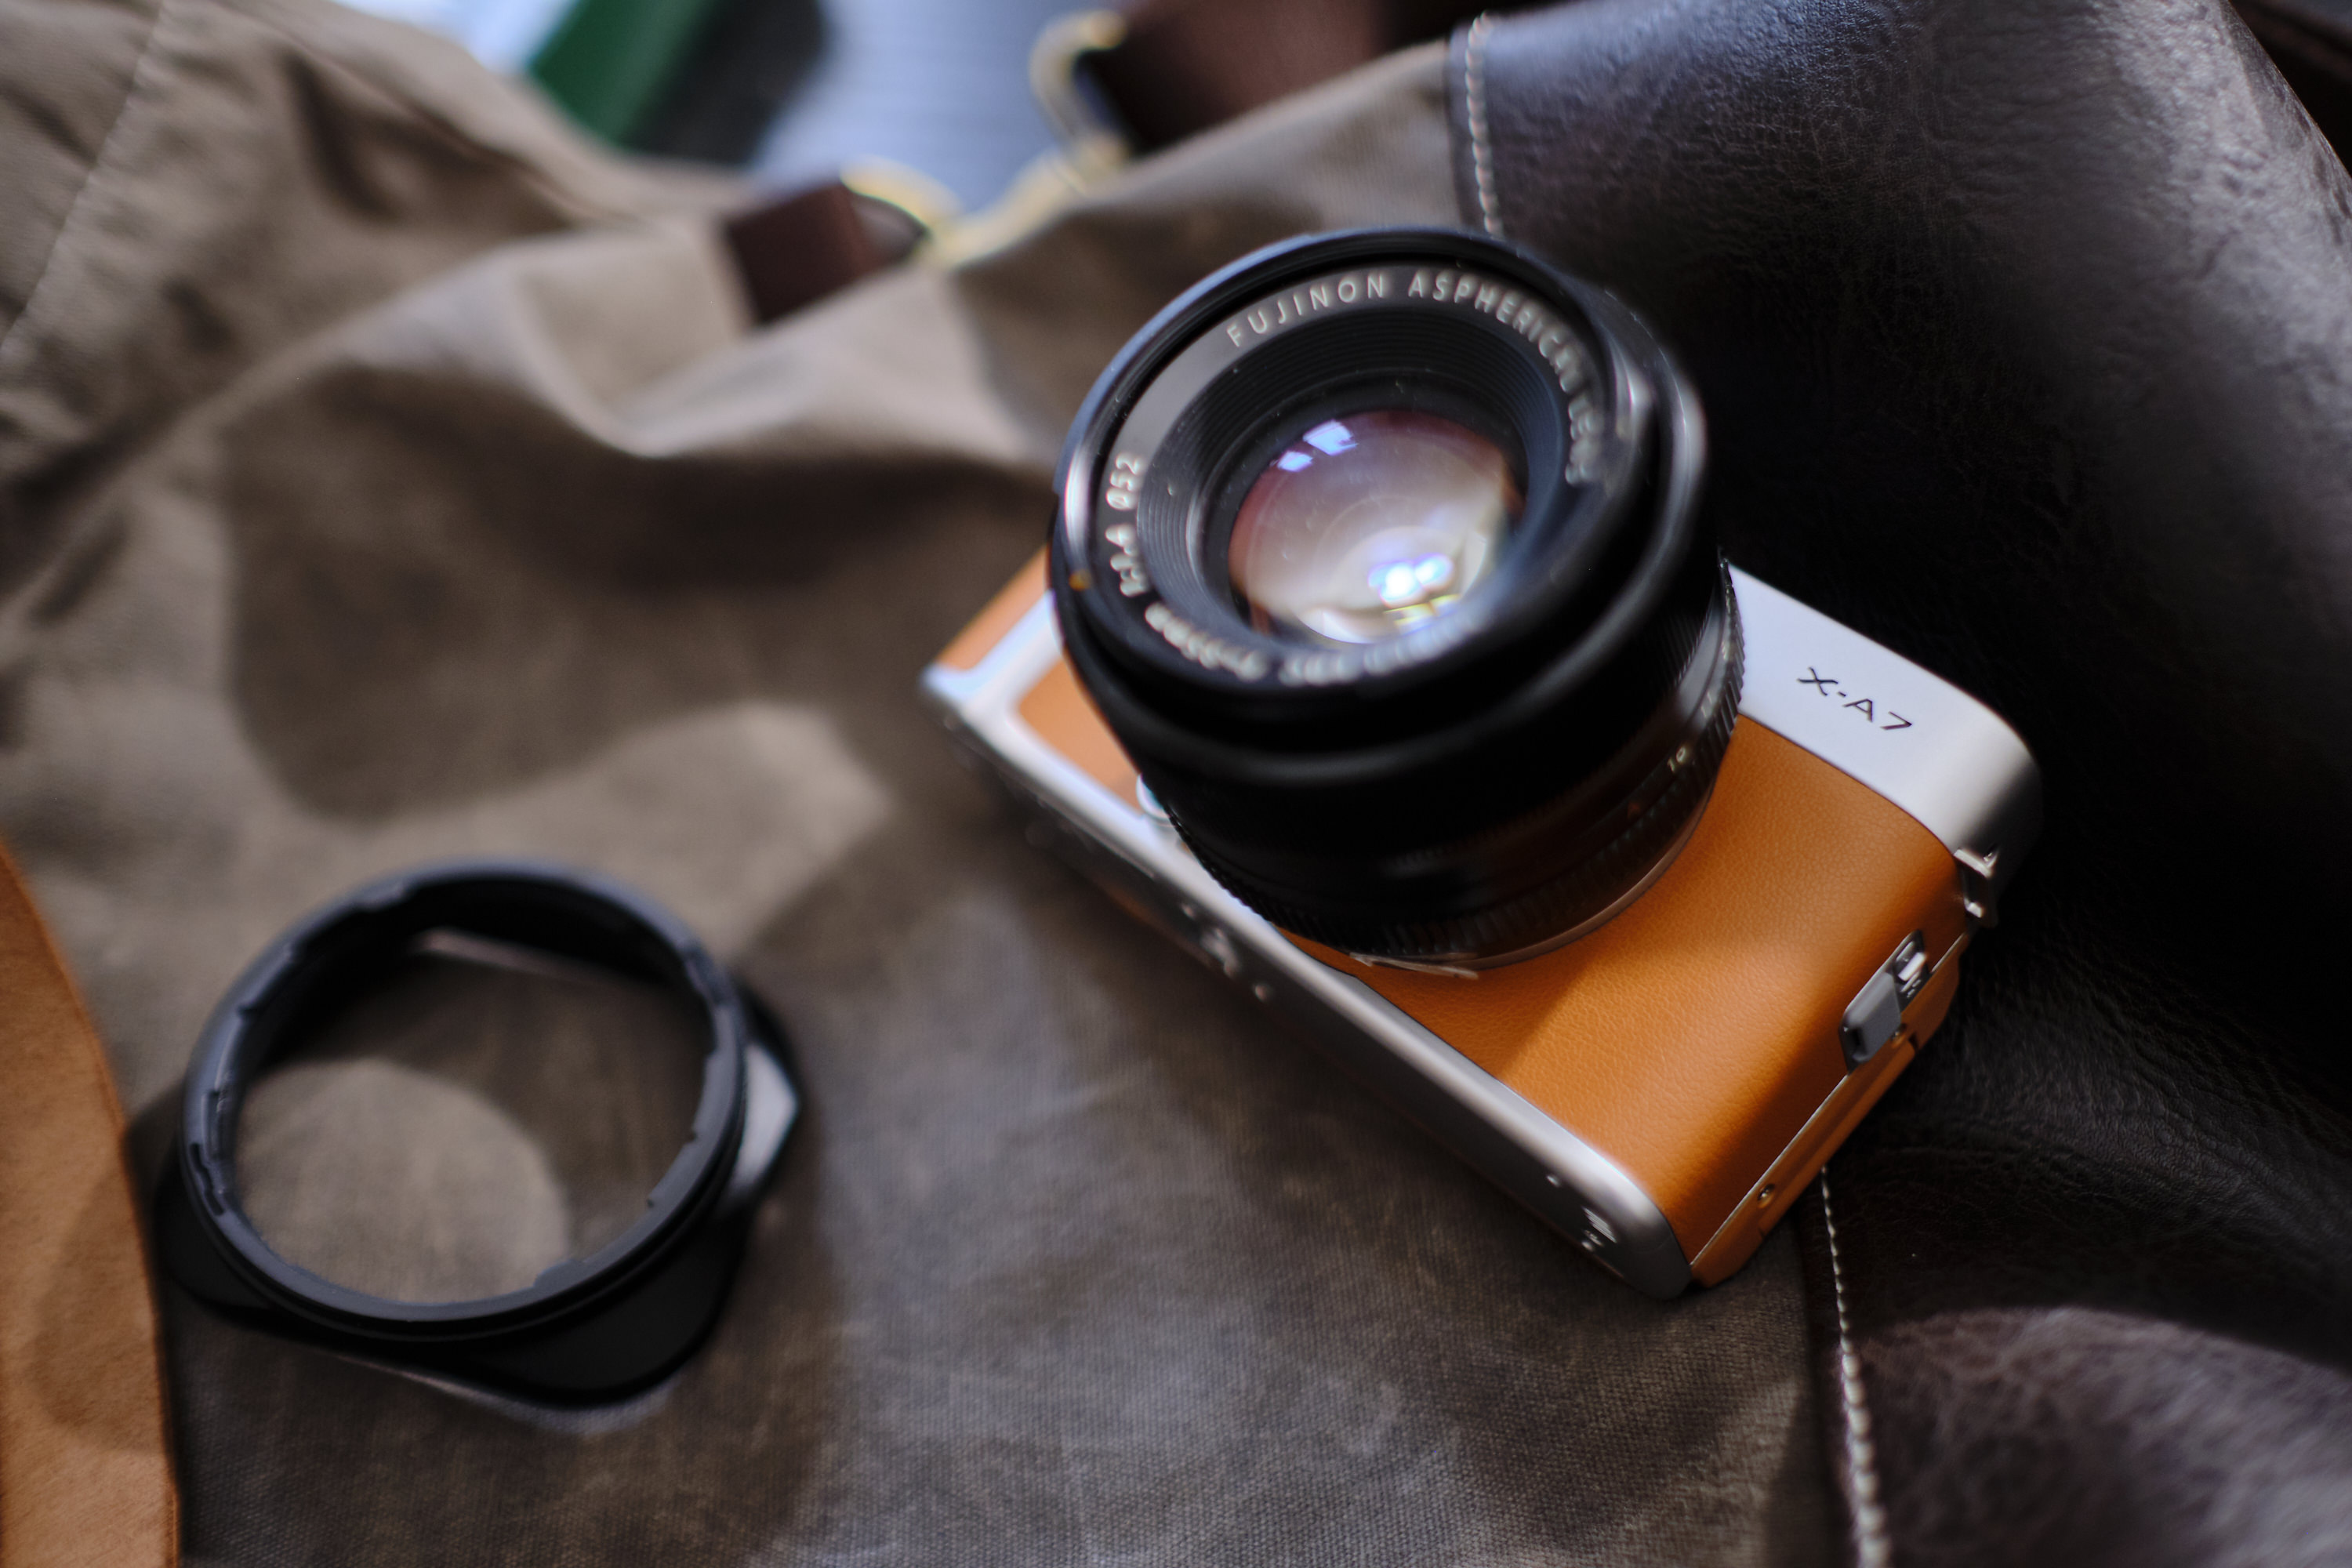 Chris Gampat The Phoblographer Fujifilm X-A7 first impressions product images 10